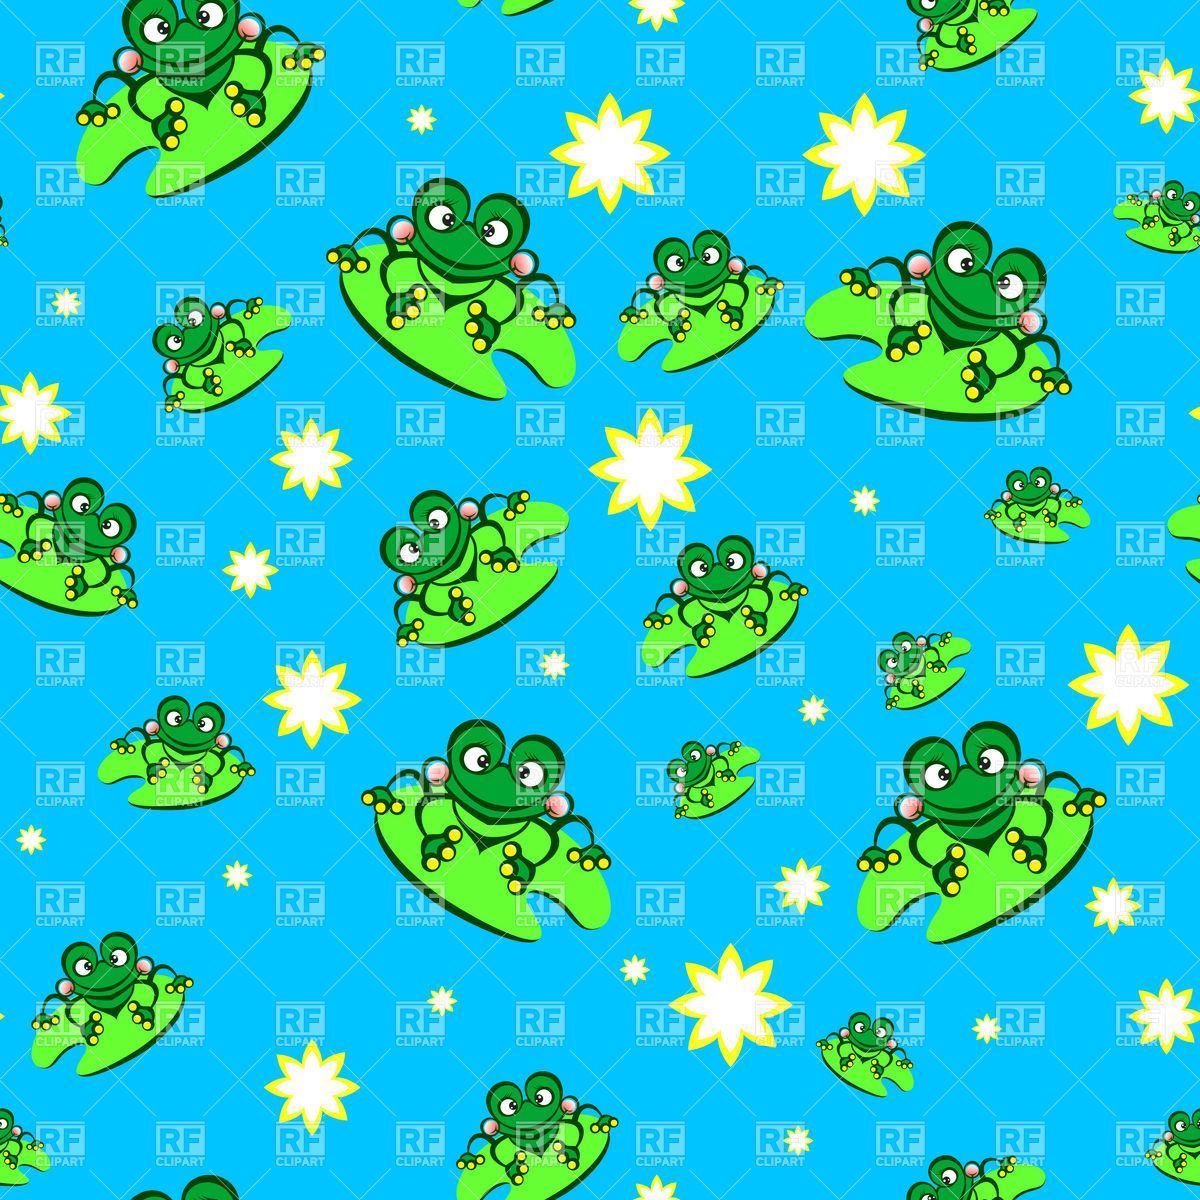 Cute Cartoon Frog Seamless Background Download Royalty Free Vector